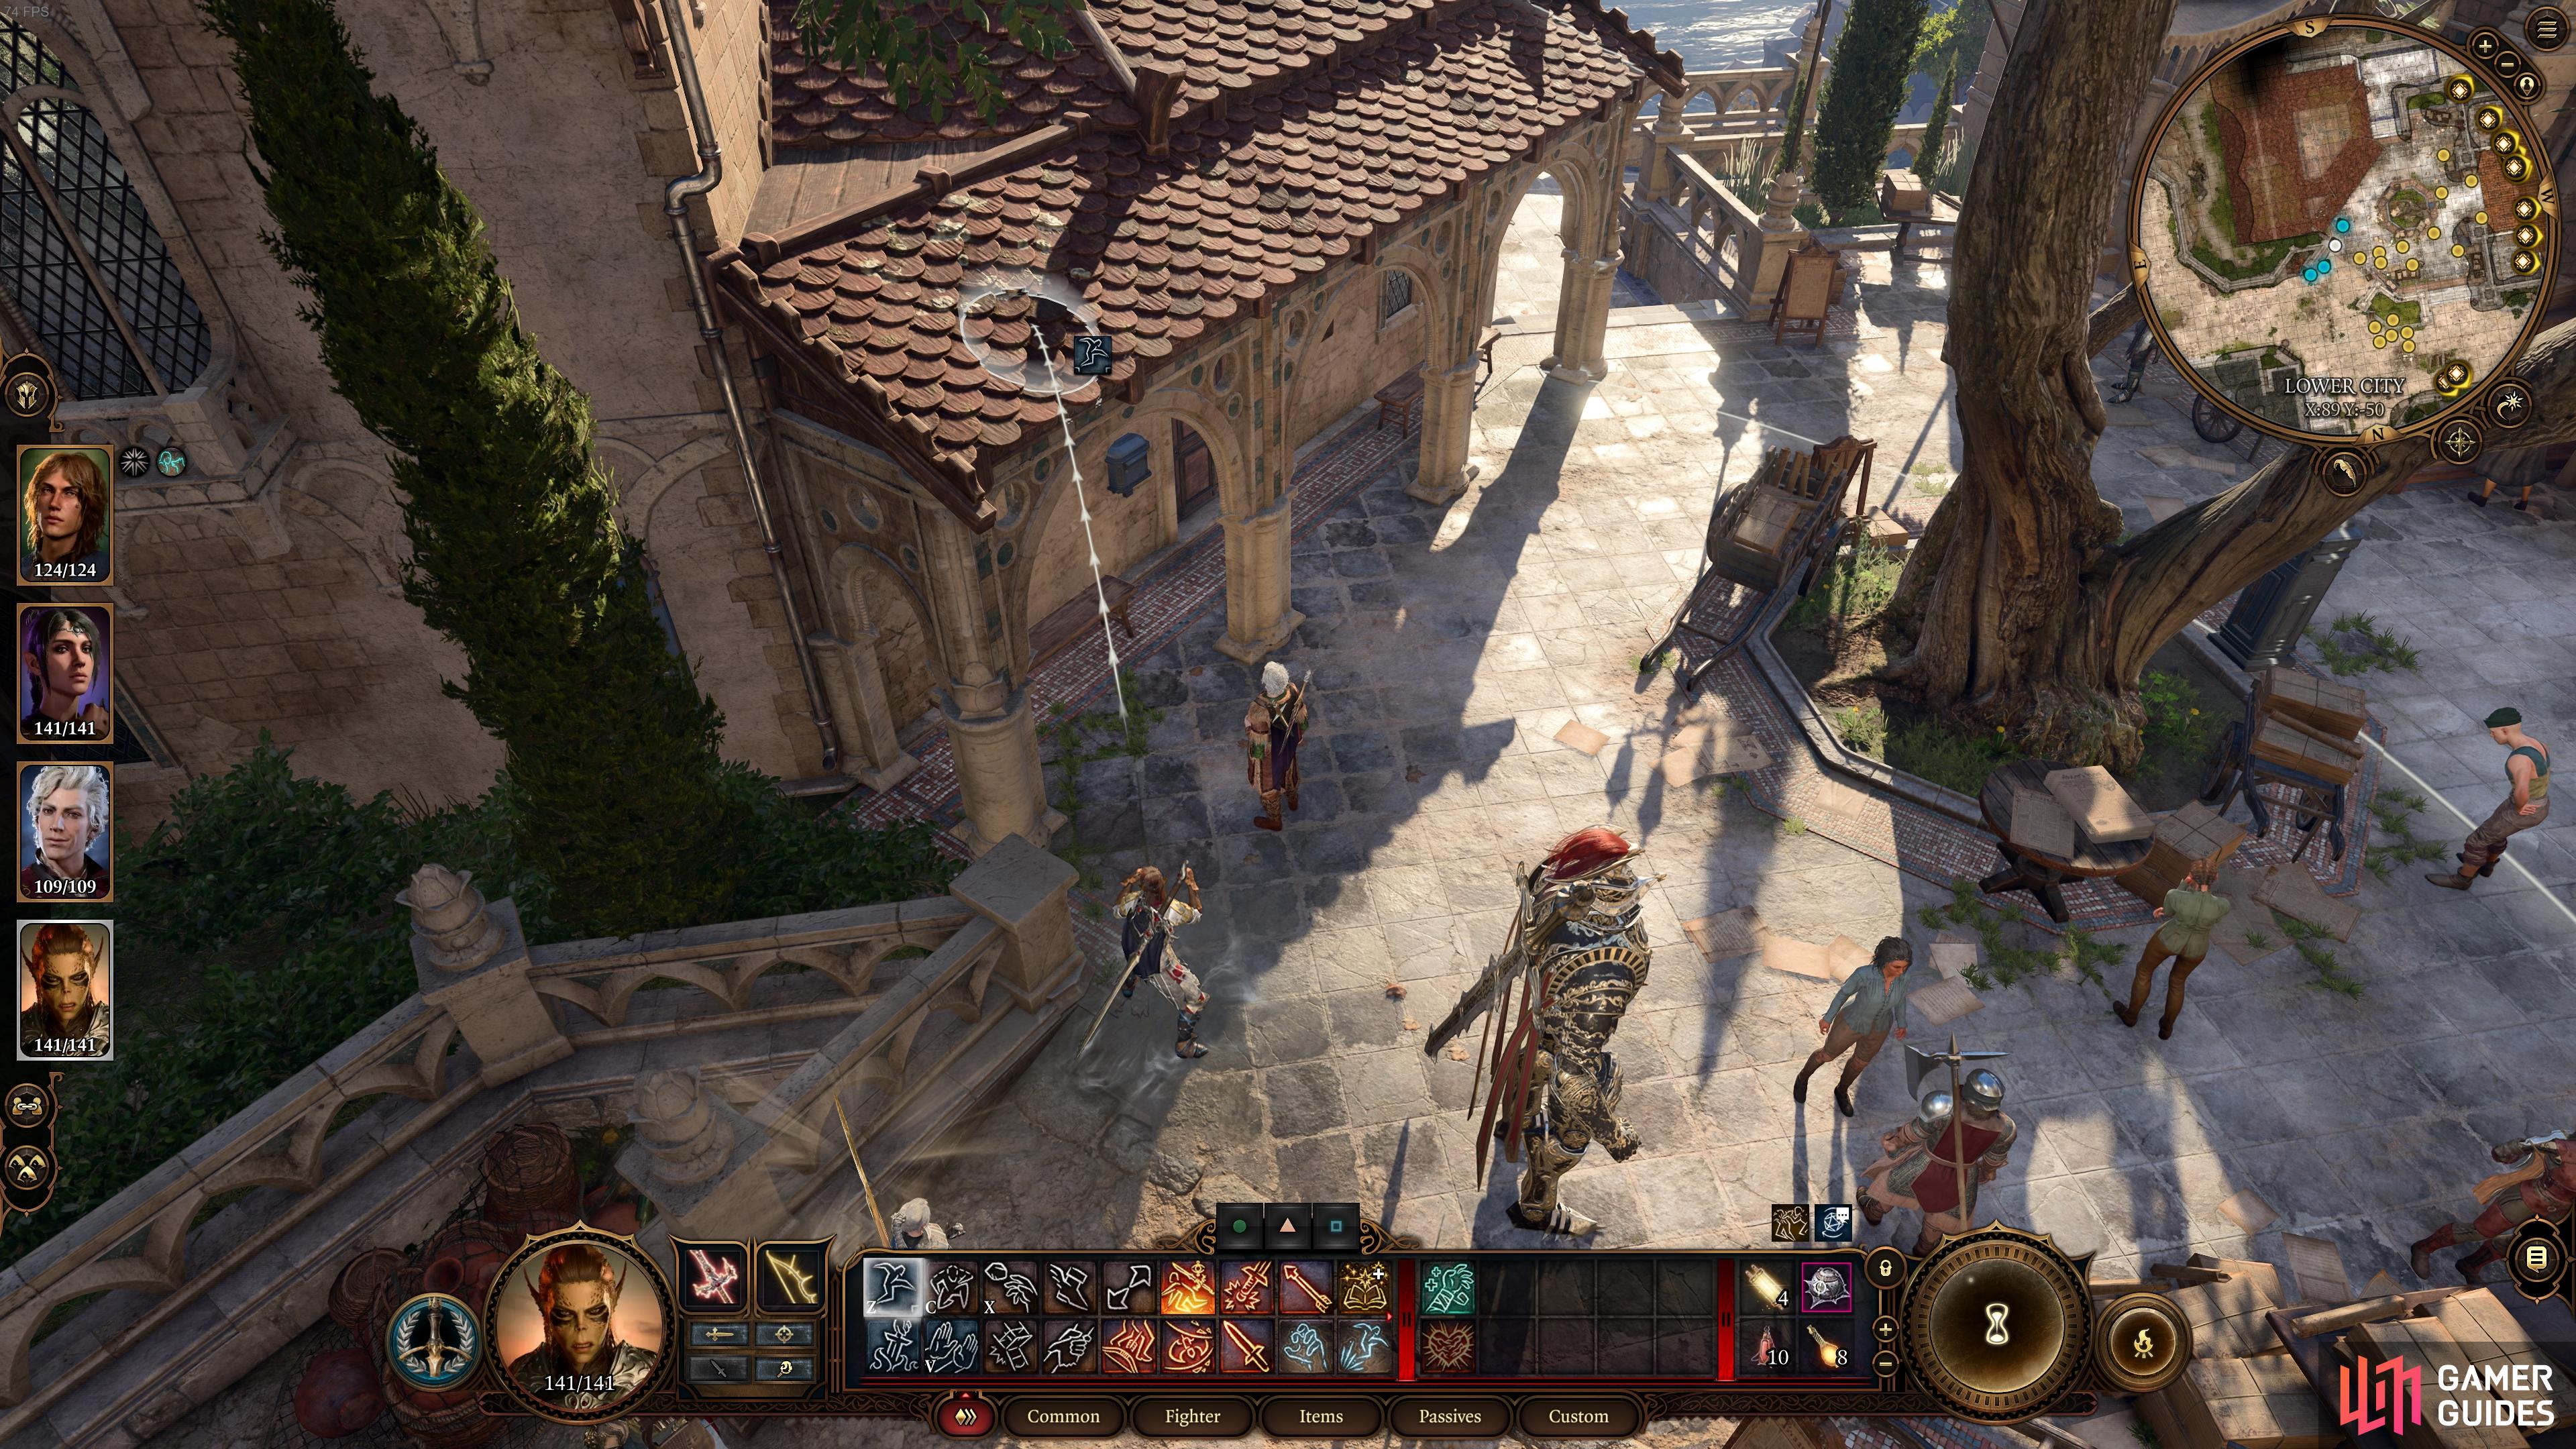 Player’s can find the Gazzette at the Basilisk Gate area.